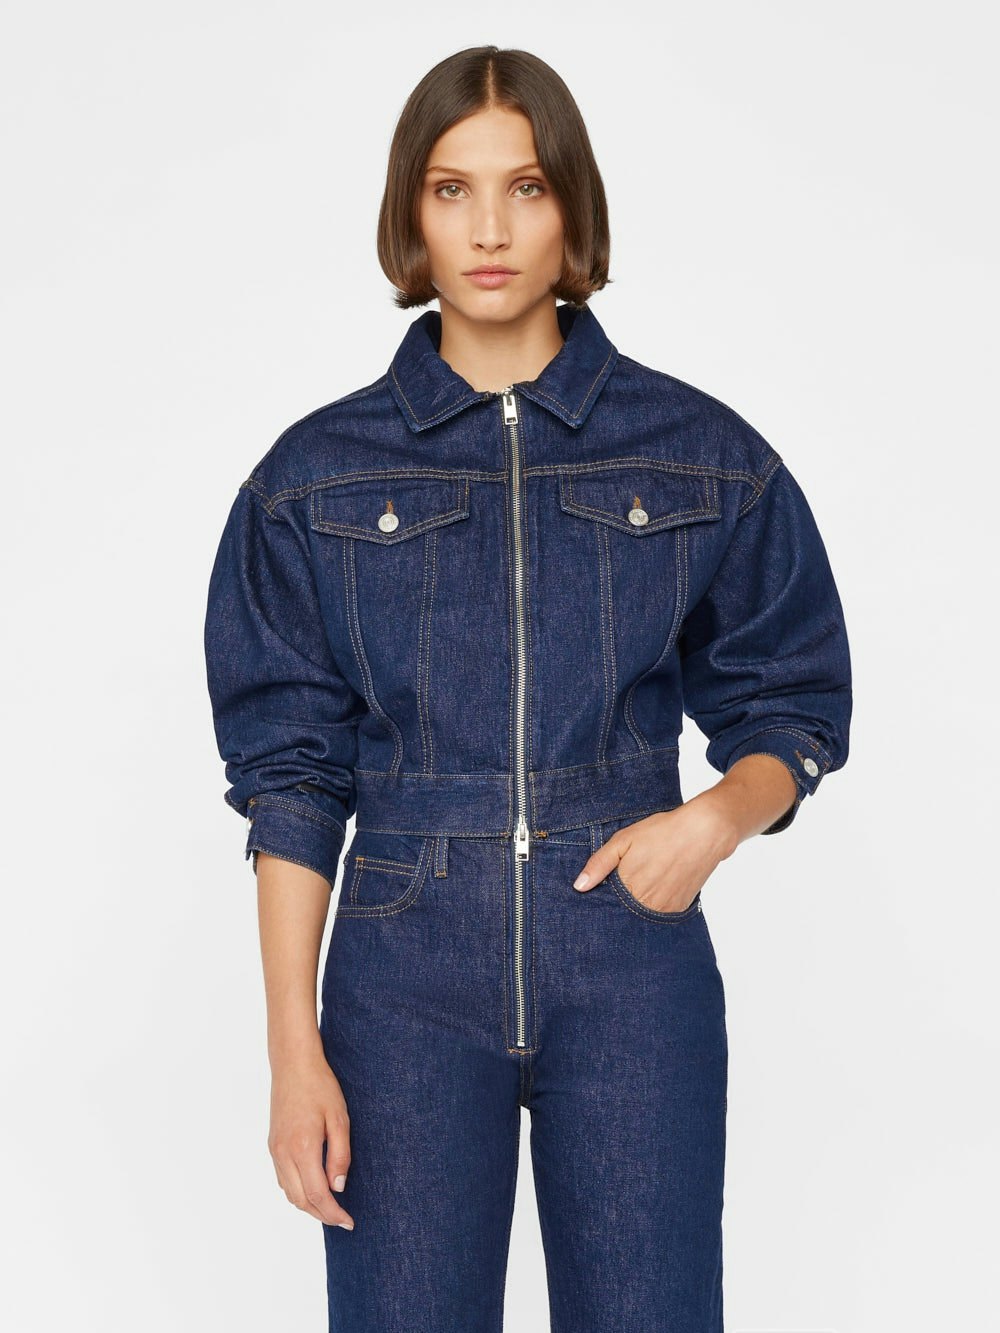 Denim Jacket Outfits For Spring: 6 Stellar Ideas To Try Now